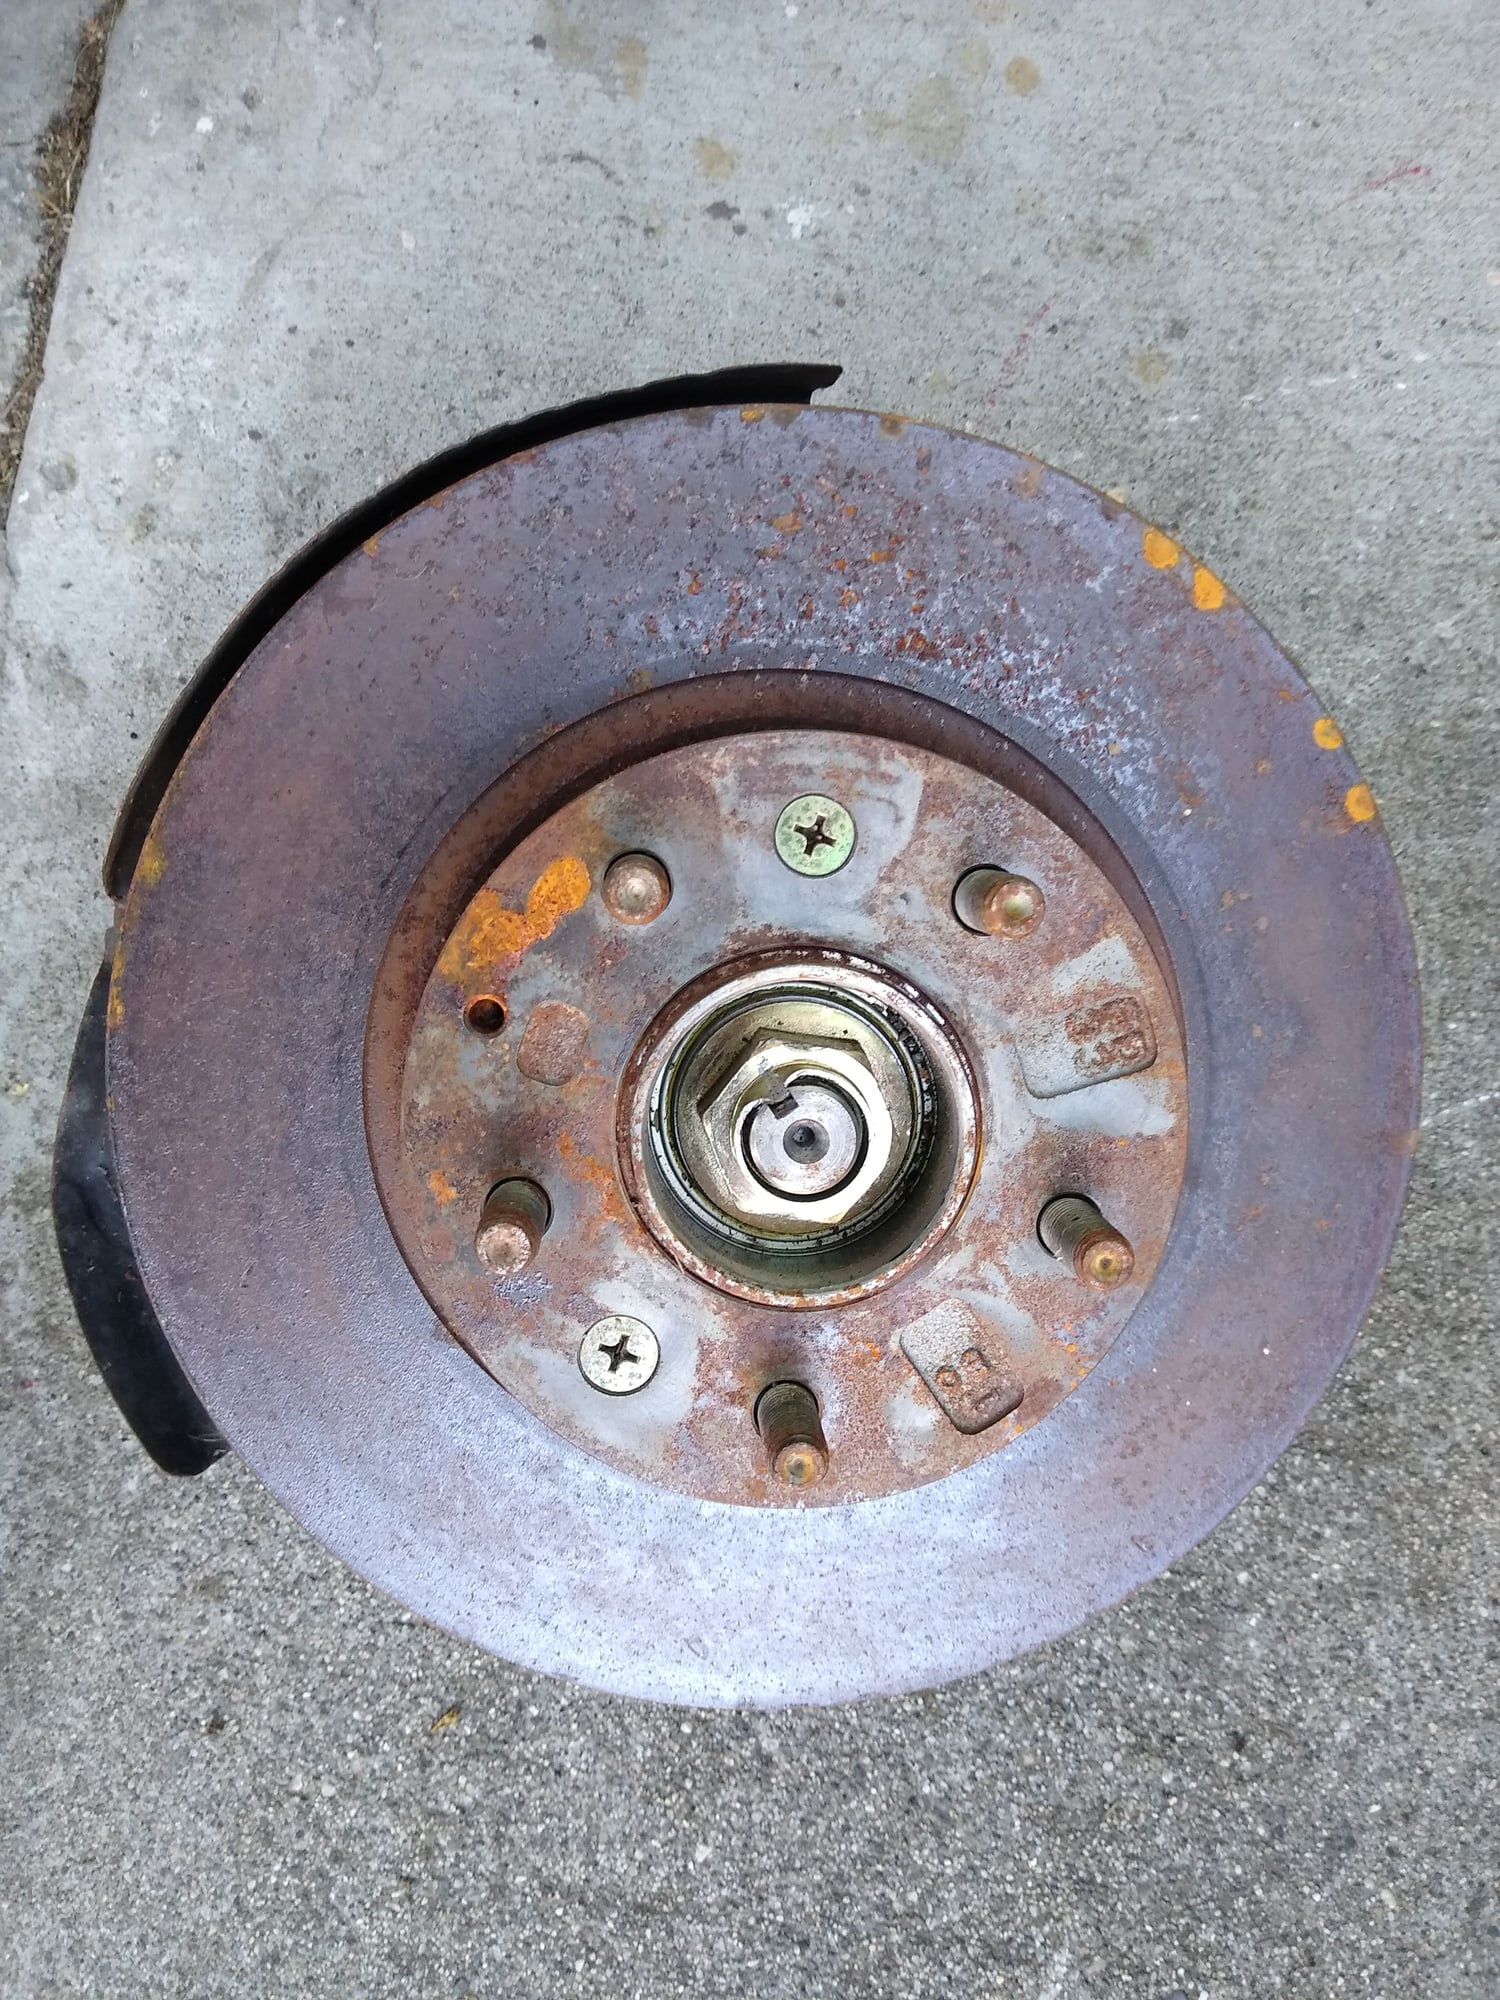 Miscellaneous - FD - Wheel Rotor & Knuckle Assembly - Used - 1993 to 1995 Mazda RX-7 - San Jose, CA 95121, United States